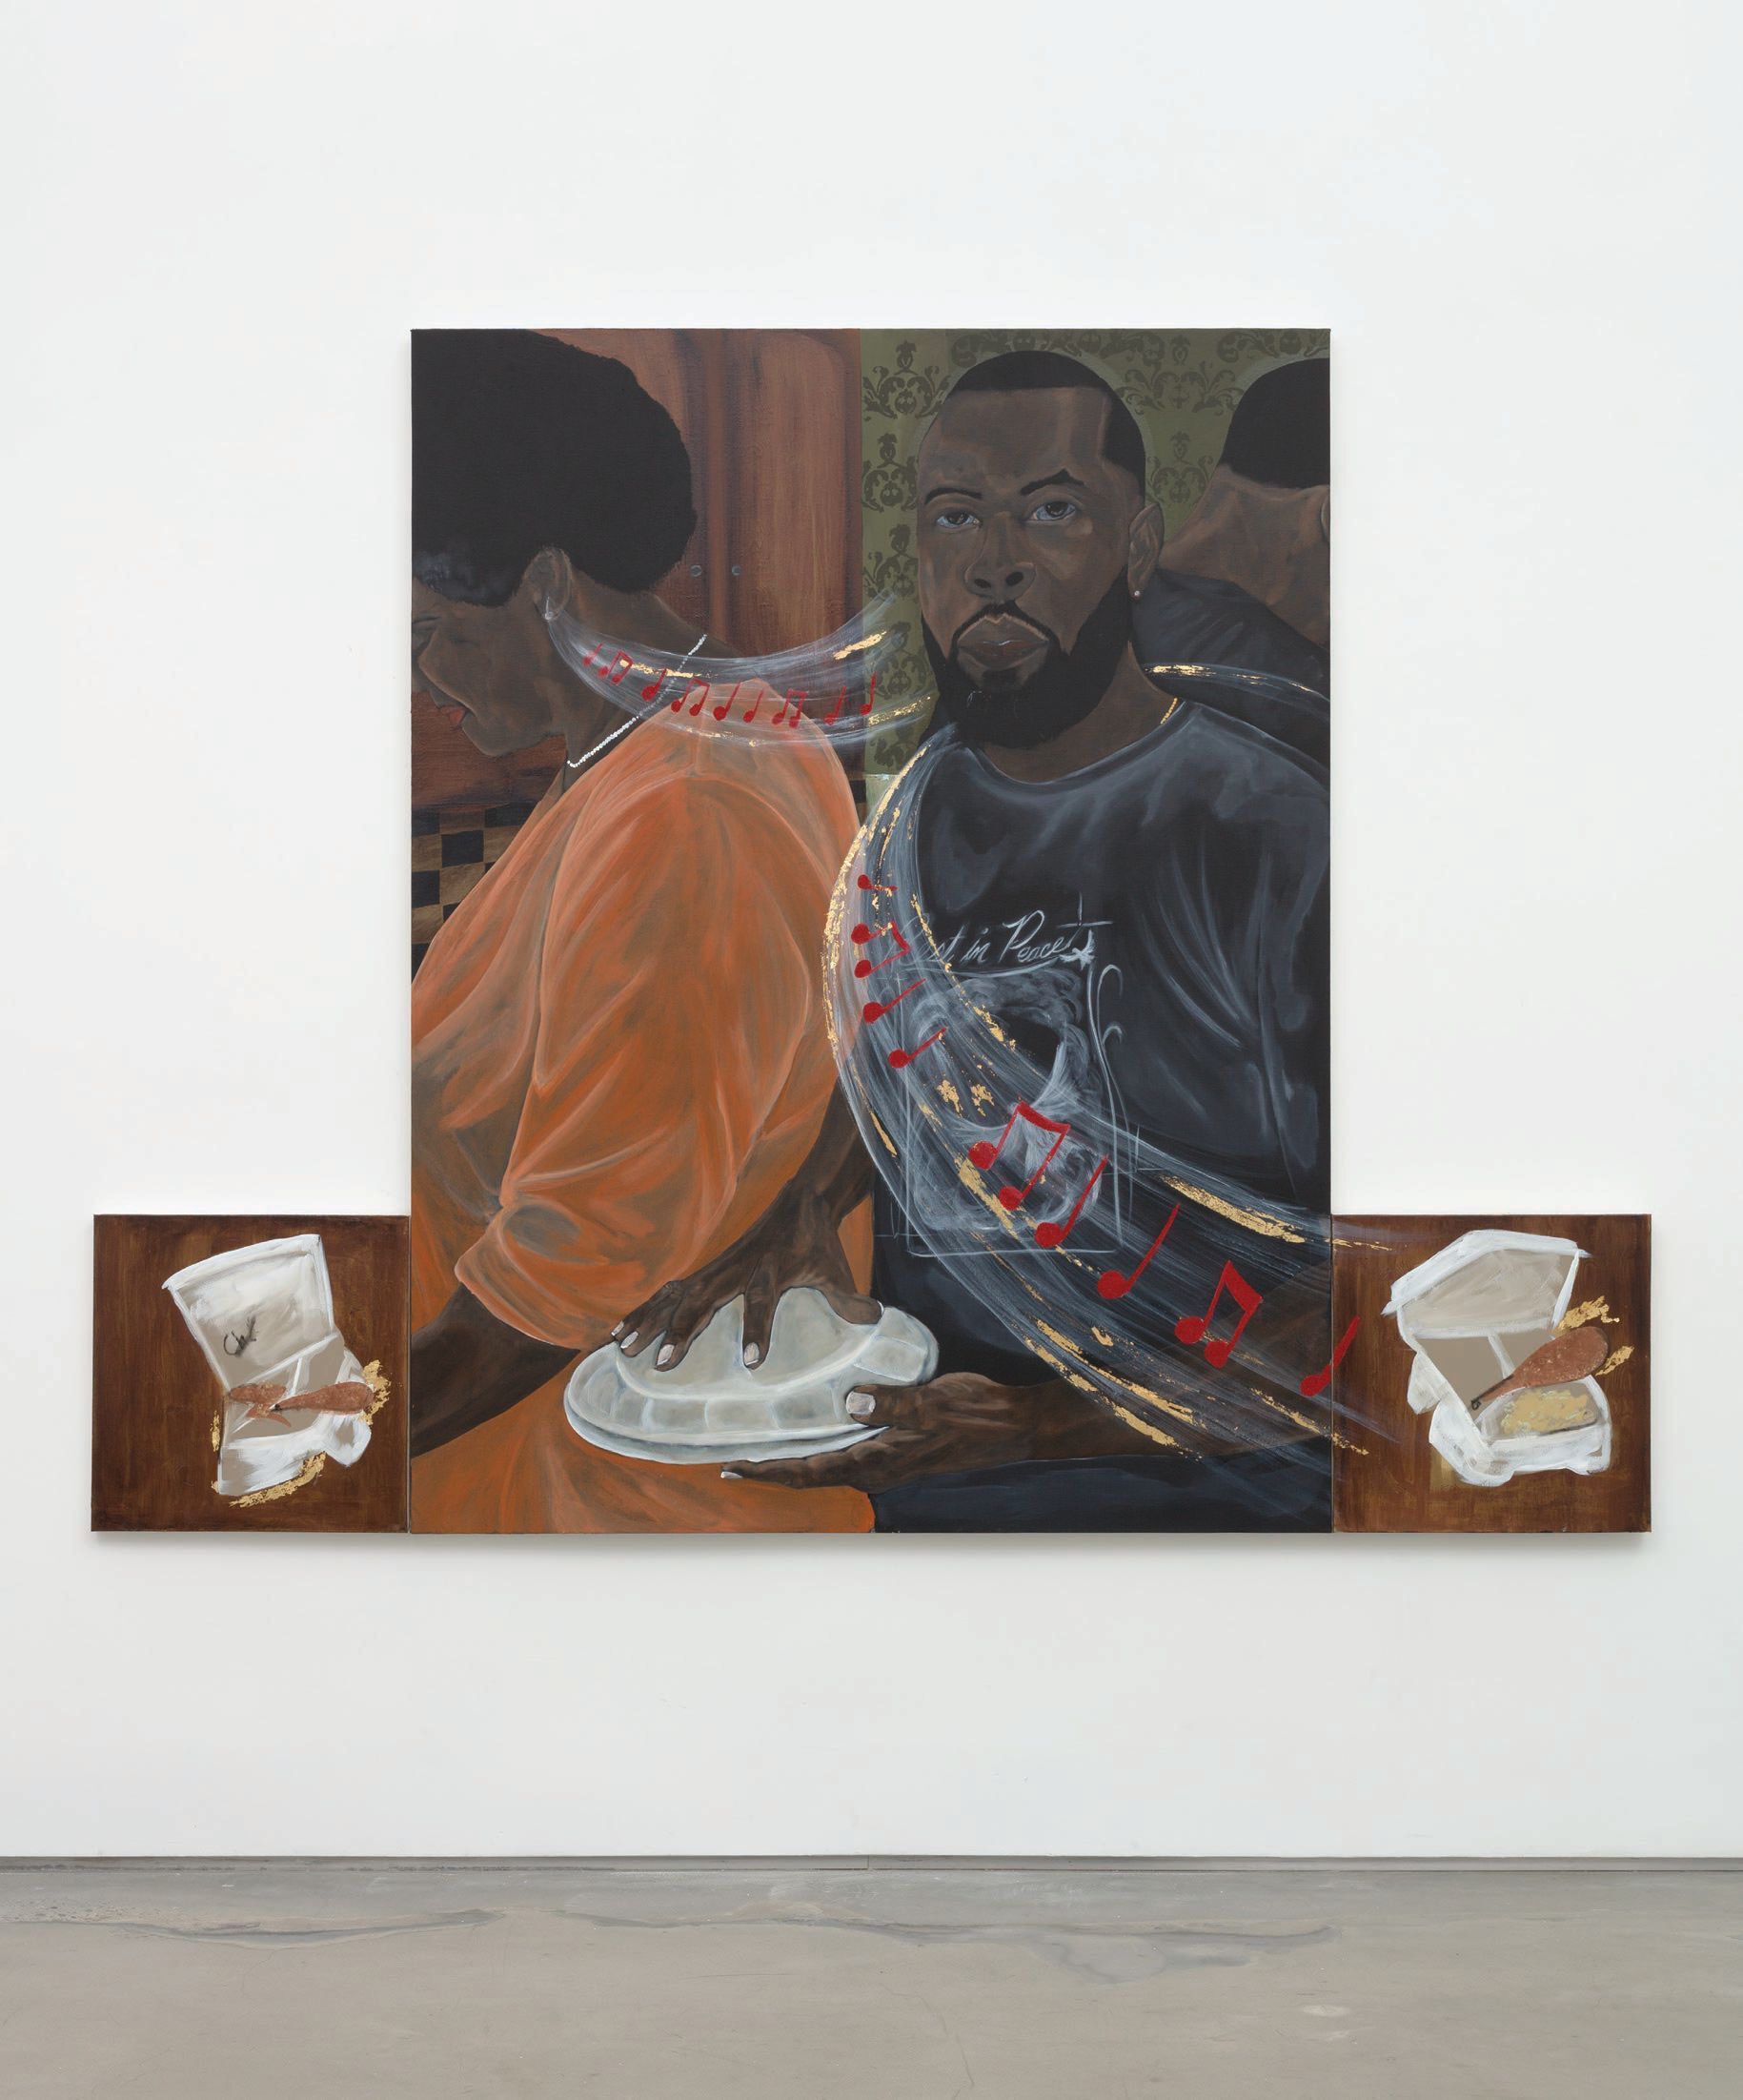 Jammie Holmes, “Hymns and Potato Salad” (2023, acrylic, gold leaf and glitter on canvas), 76 inches by 98 1/2 inches. PHOTO BY LANCE BREWER/COURTESY OF THE ARTIST AND MARIANNE BOESKY GALLERY, NEW YORK AND ASPEN. © JAMMIE HOLMES